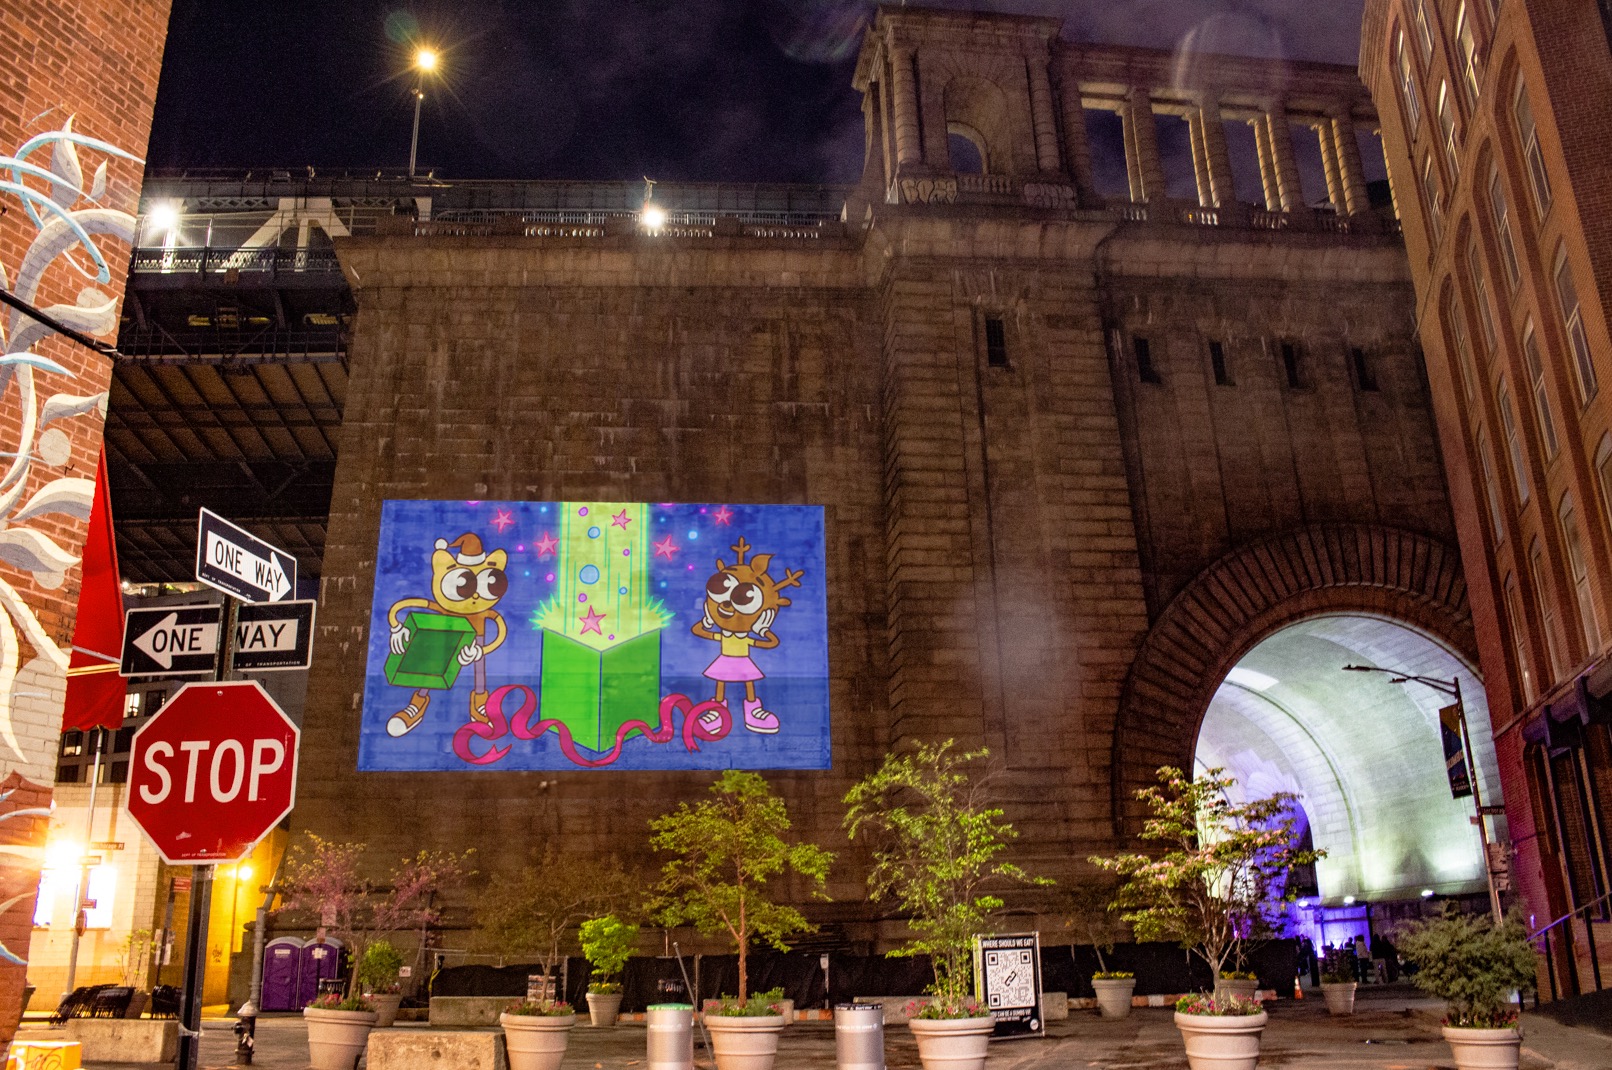 NYC DUMBO Improvement District - Community + Small Business - Augenblick Holiday Projections @ the Archway